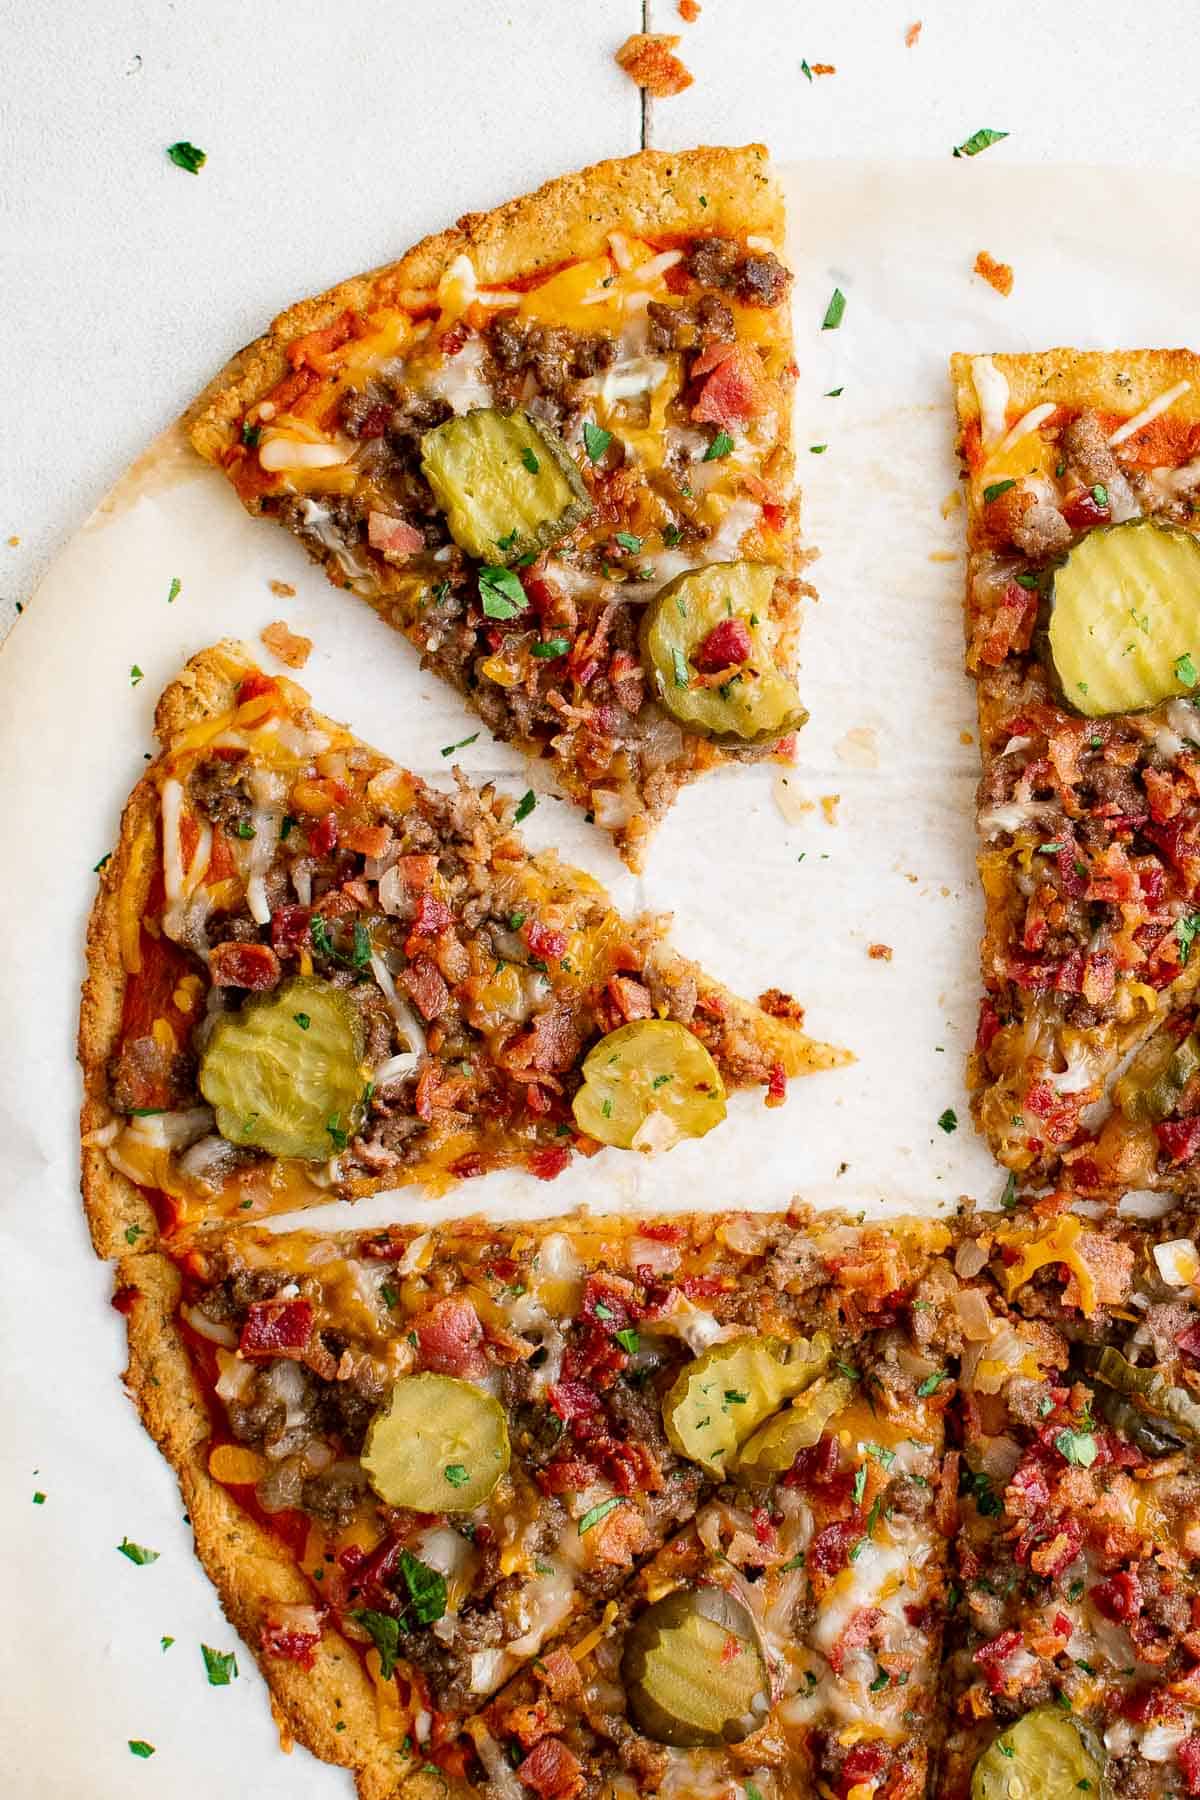 a keto bacon cheeseburger pizza with ground beef, bacon, cheese, pickles, onion and garlic